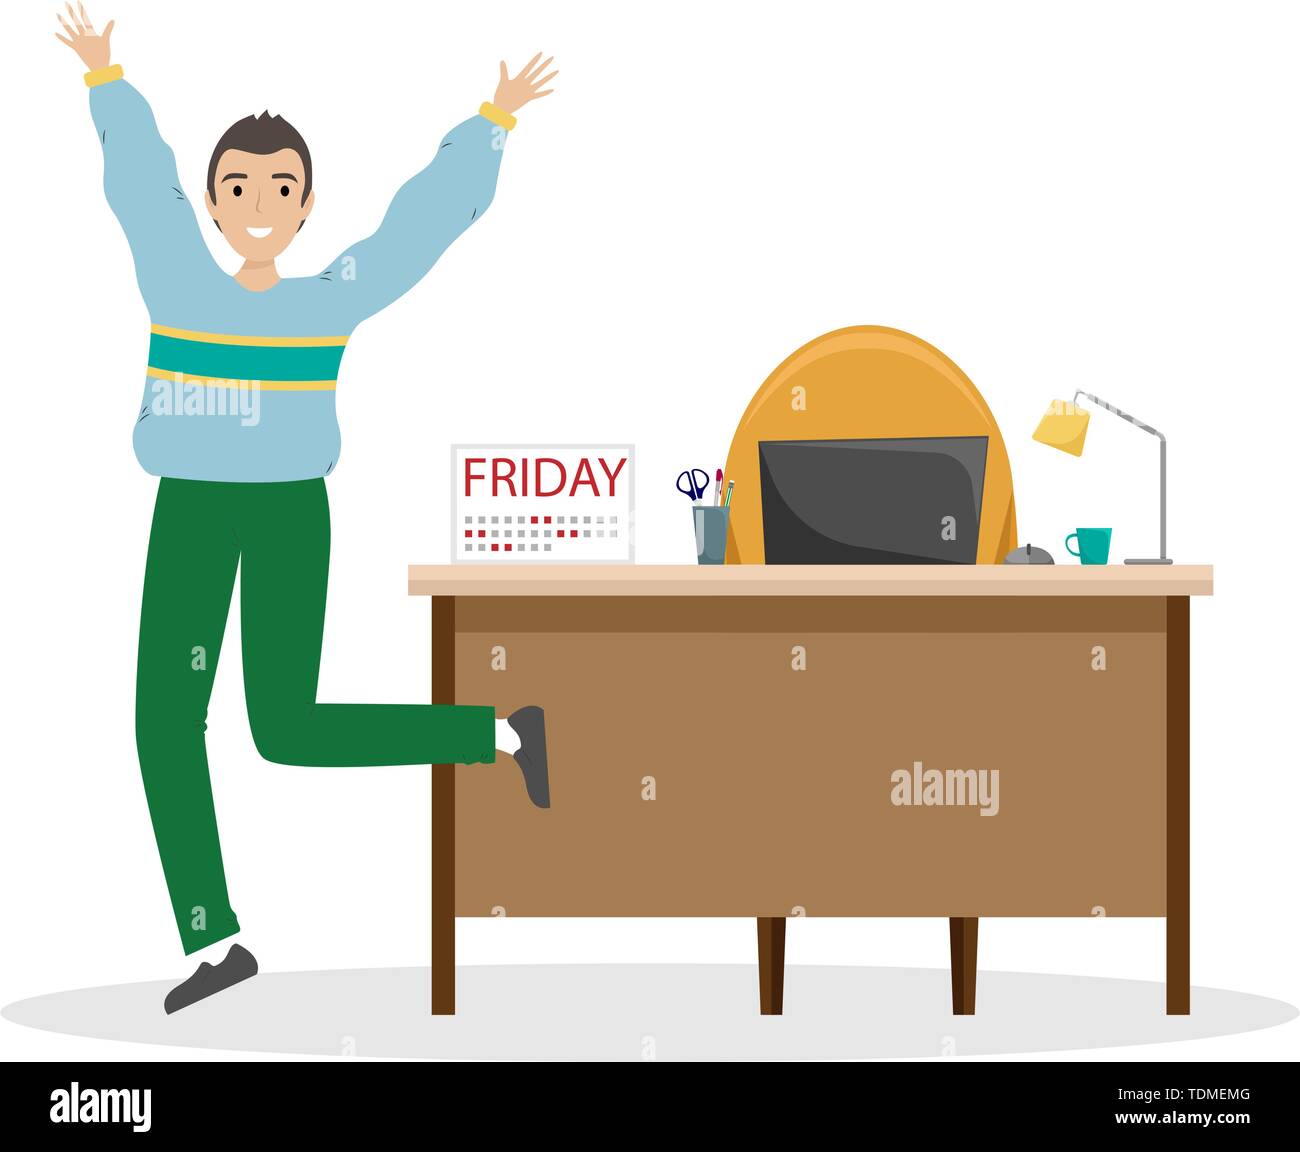 The man enjoys the end of the working week. Friday at the office. Flat vector illustration Stock Vector